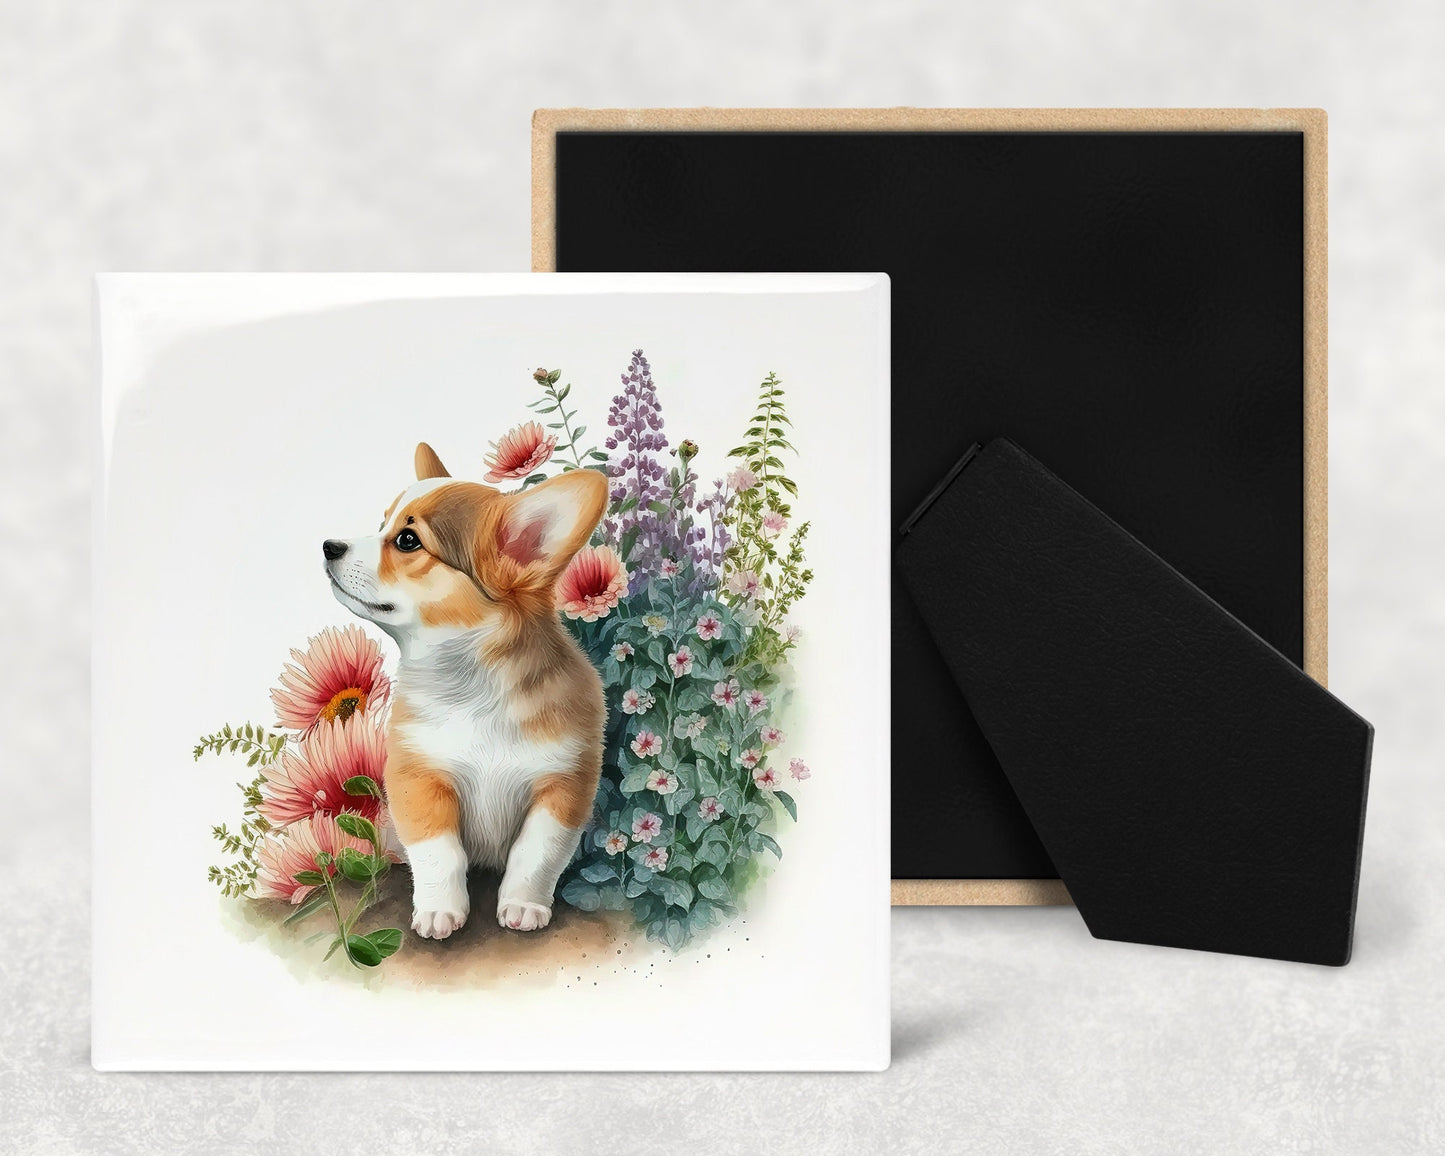 Cute Corgi Puppy Art Decorative Ceramic Tile Set with Optional Easel Back - Available in 4 sizes - Set of 4